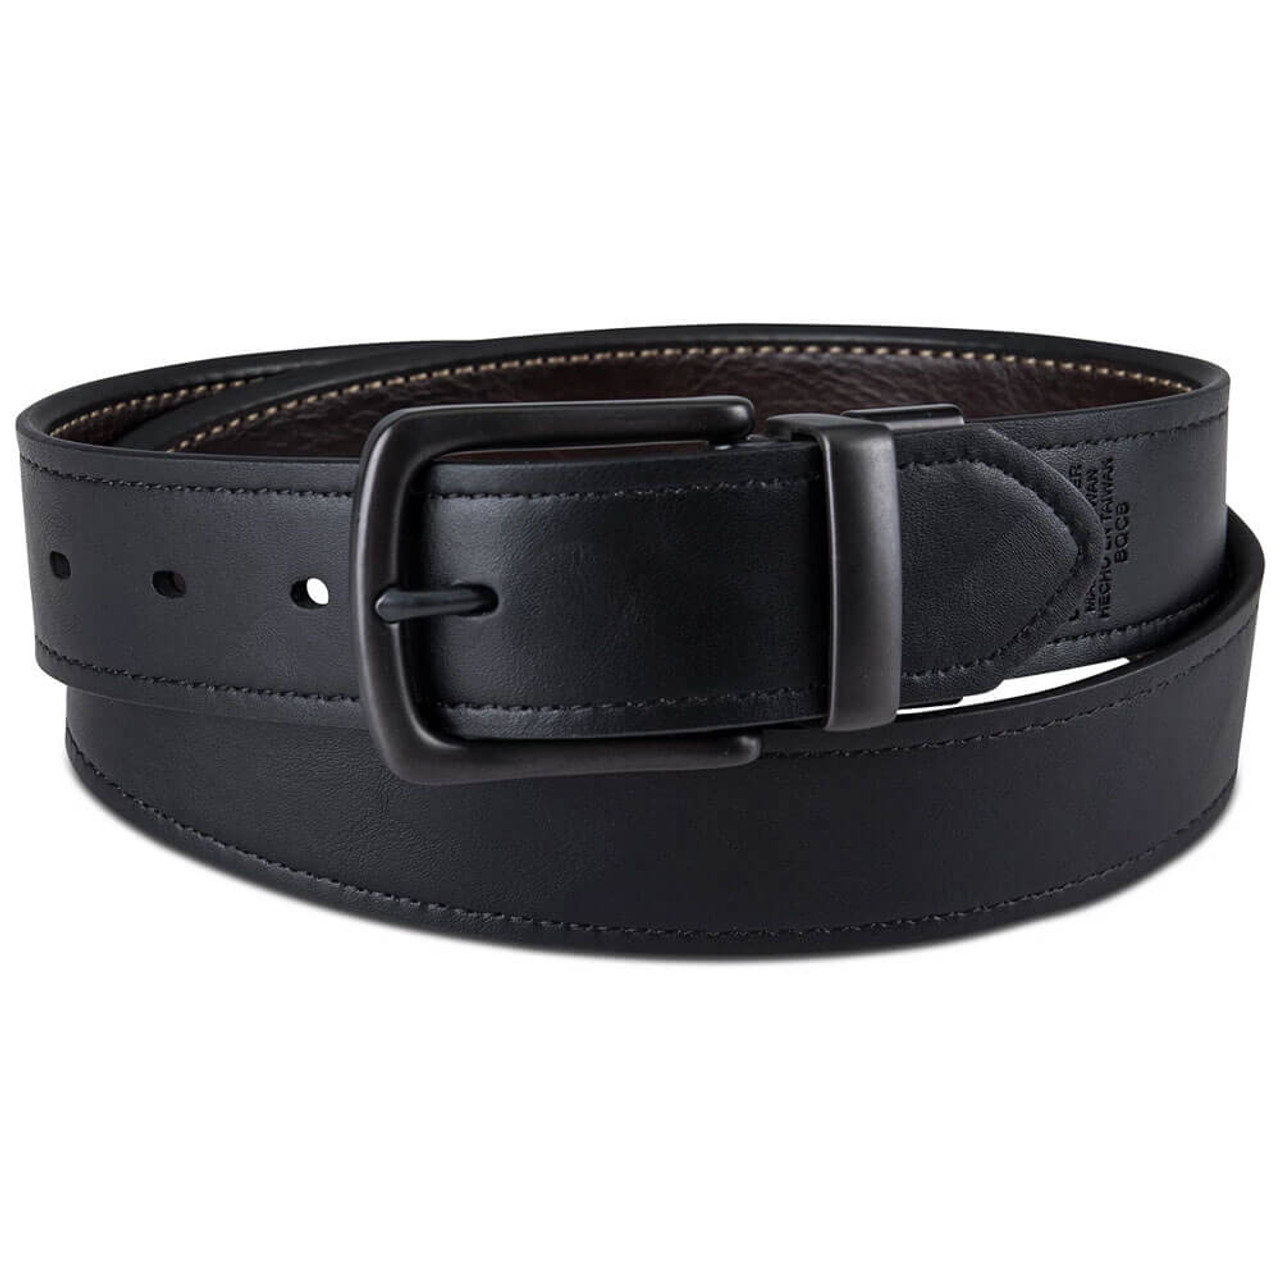 Levi's Men's Reversible Casual Jeans Belt, Brown/Black 1, Small (30-32) at   Men's Clothing store